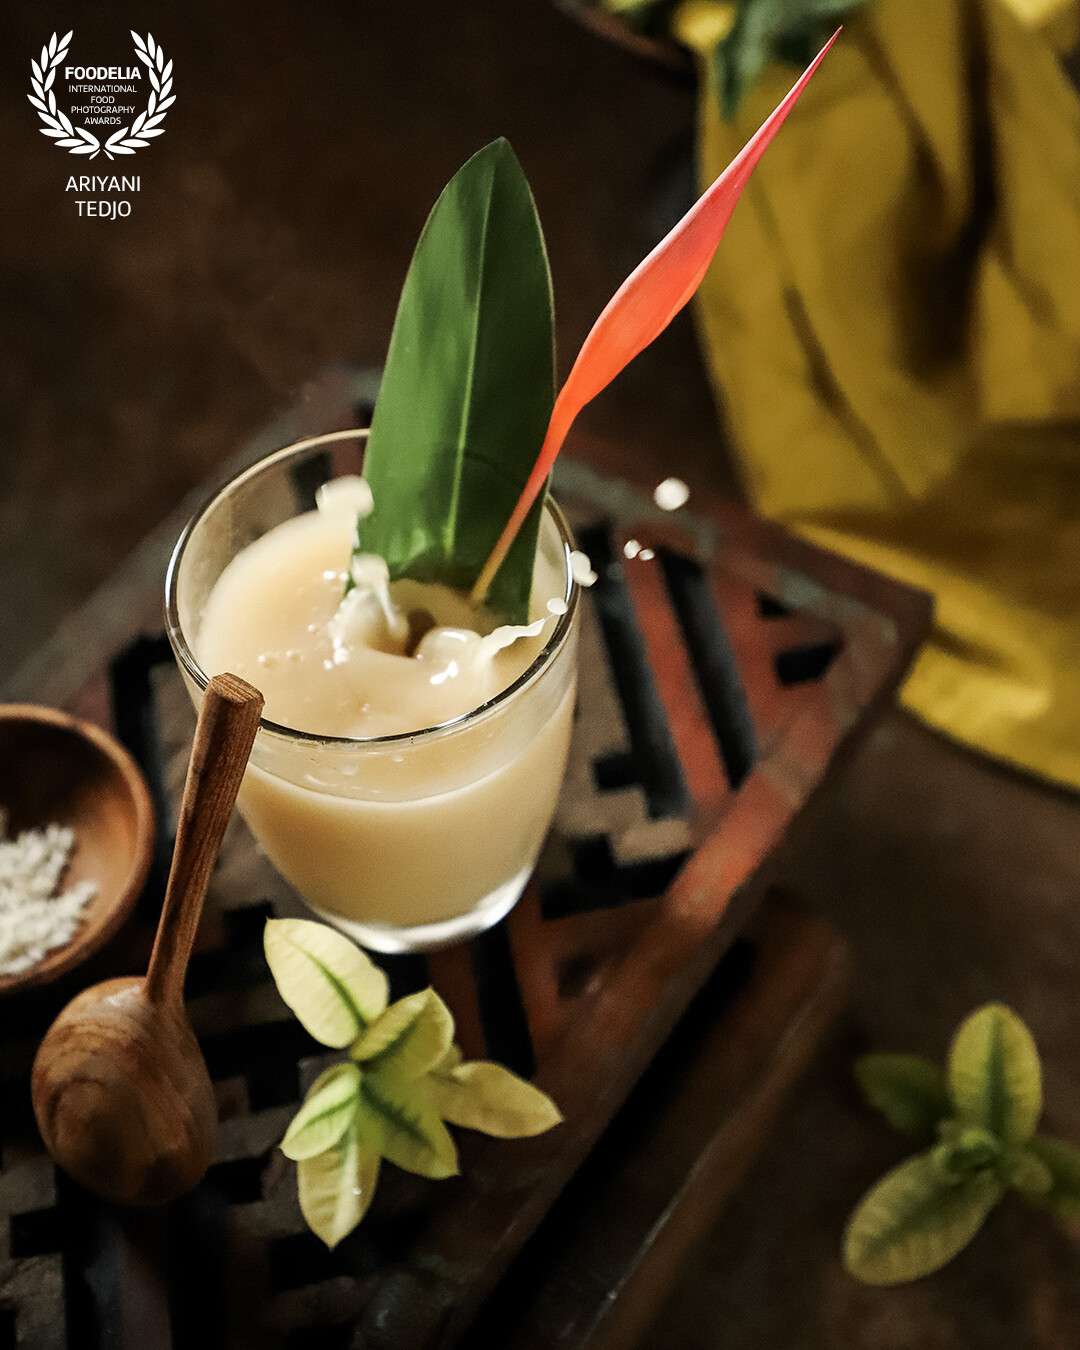 JAMU BERAS KENCUR<br />
<br />
An Indonesian traditional herbal remedy, named Jamu in Indonesian. This particular variant is Jamu Beras Kencur, a mixture of rice milk and lesser galangal juice.